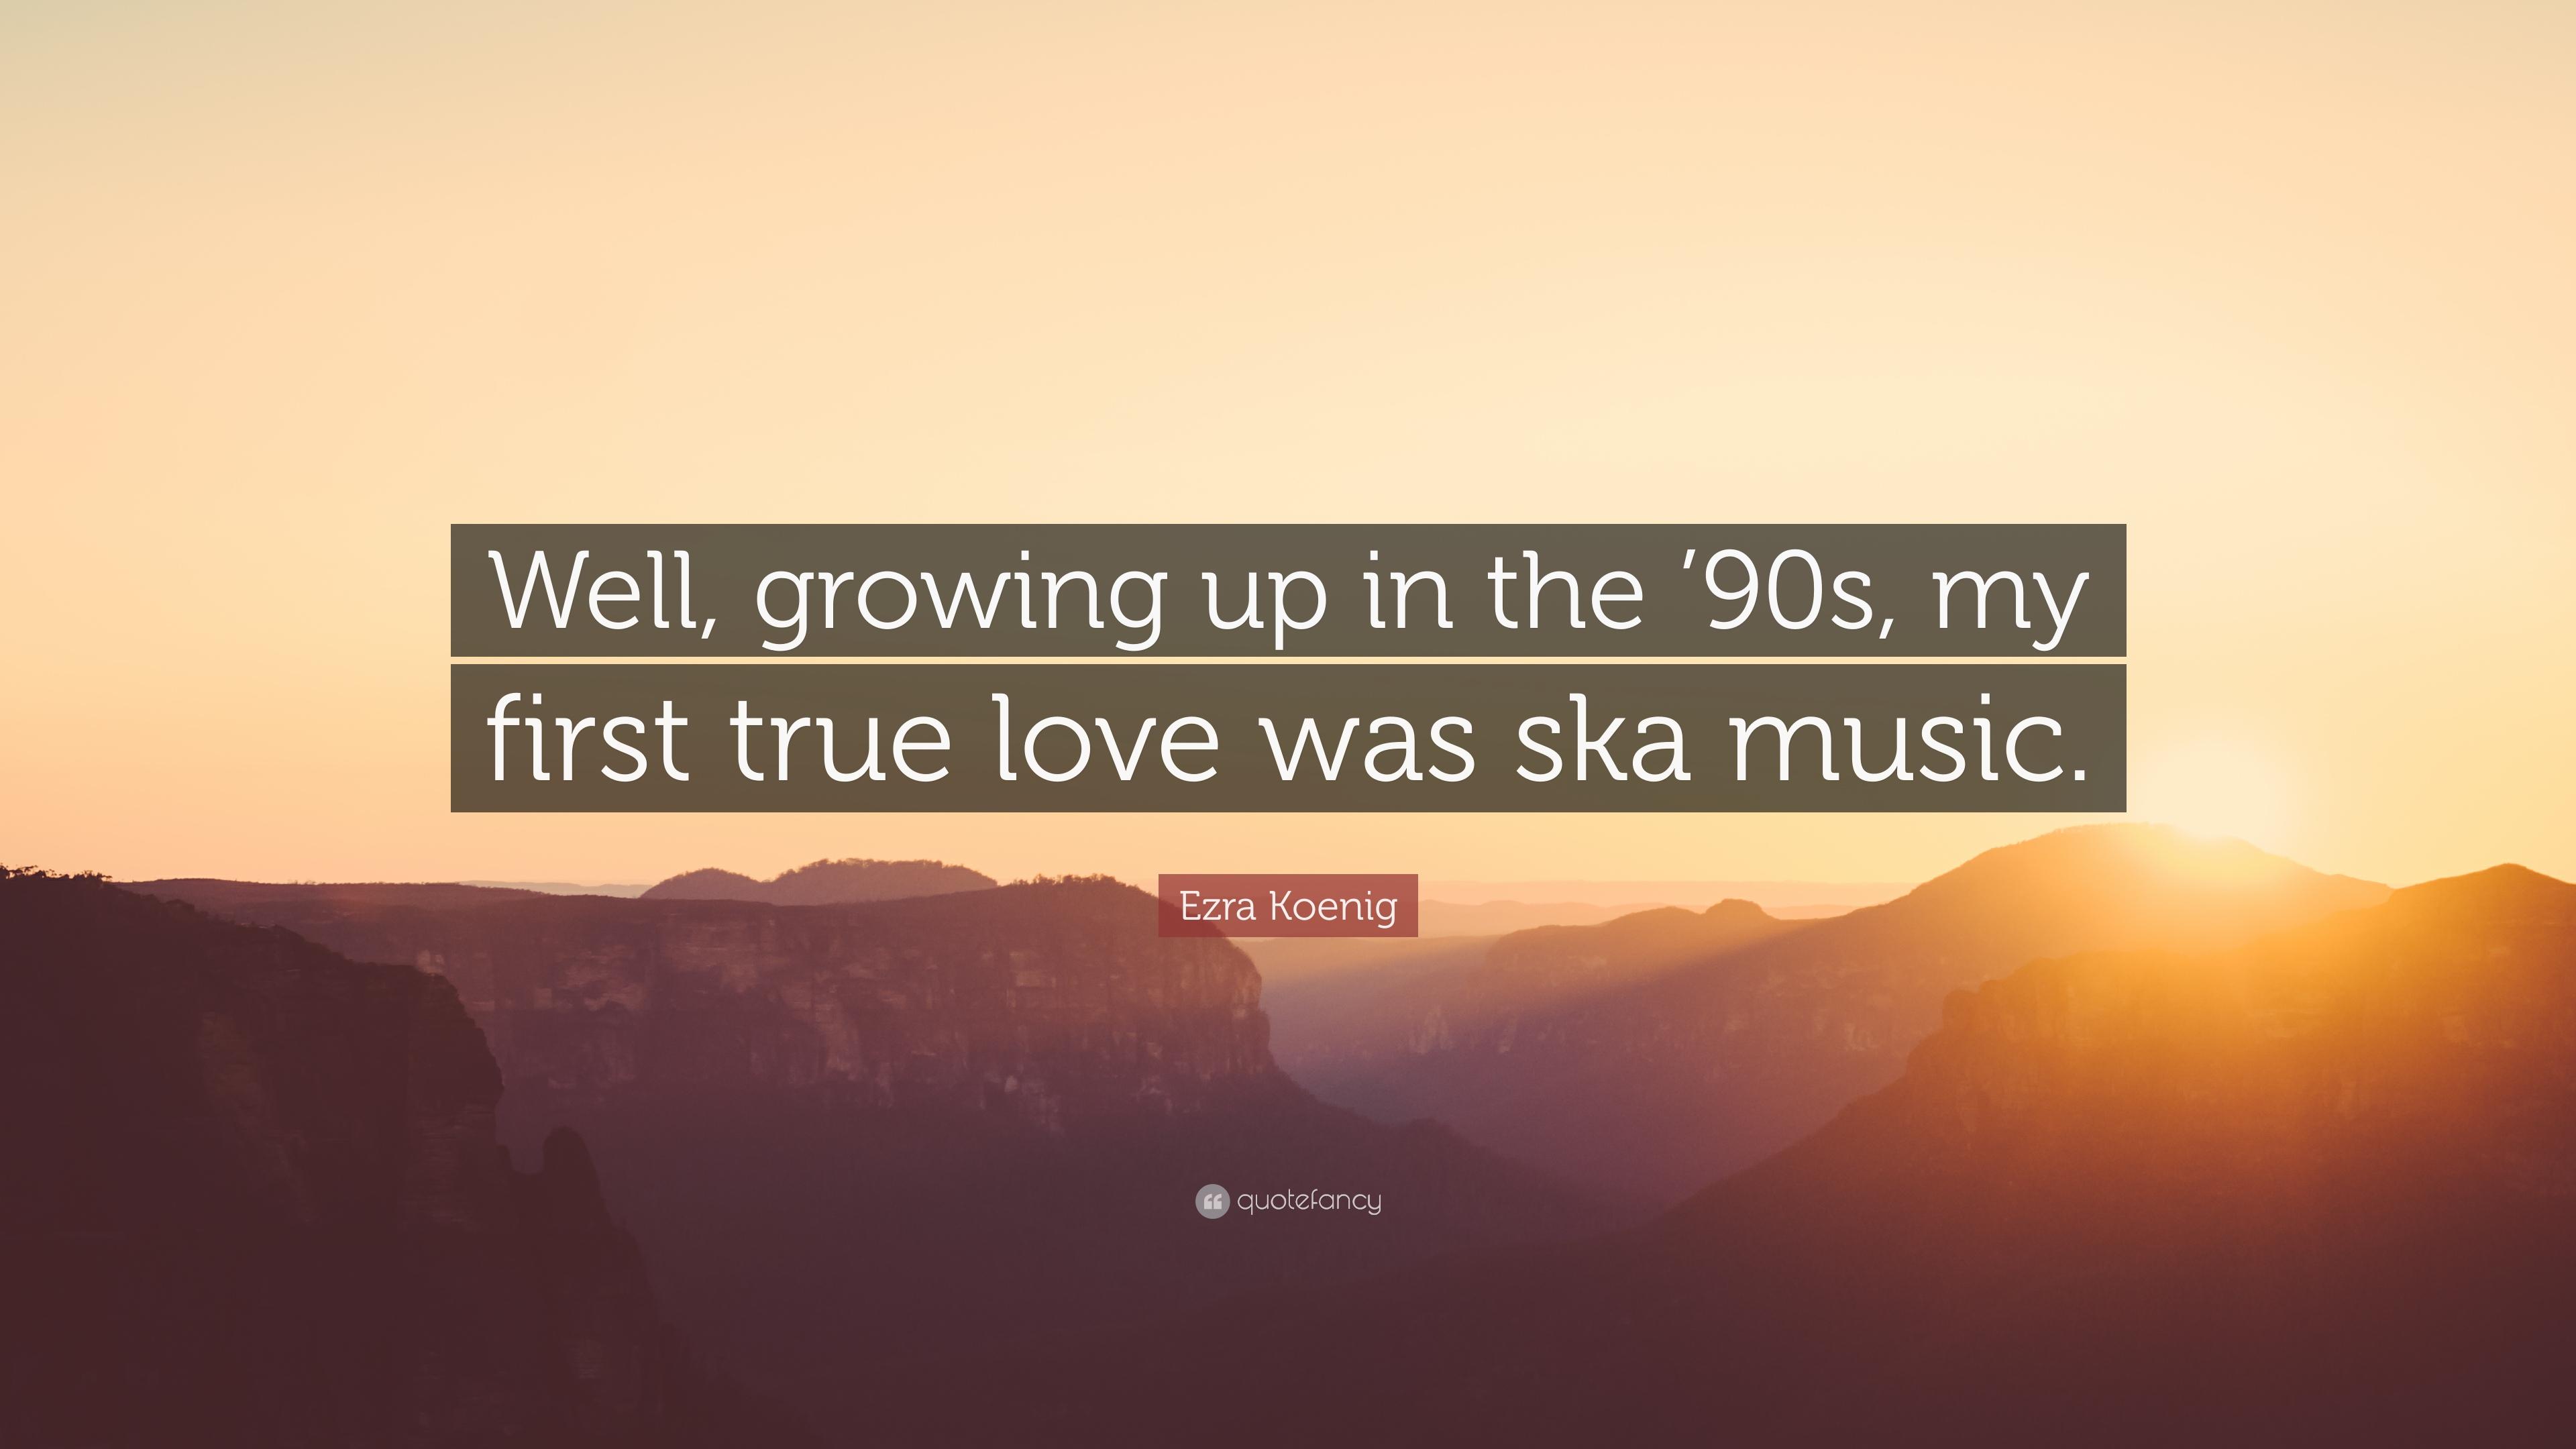 Ezra Koenig Quote: “Well, growing up in the '90s, my first true love